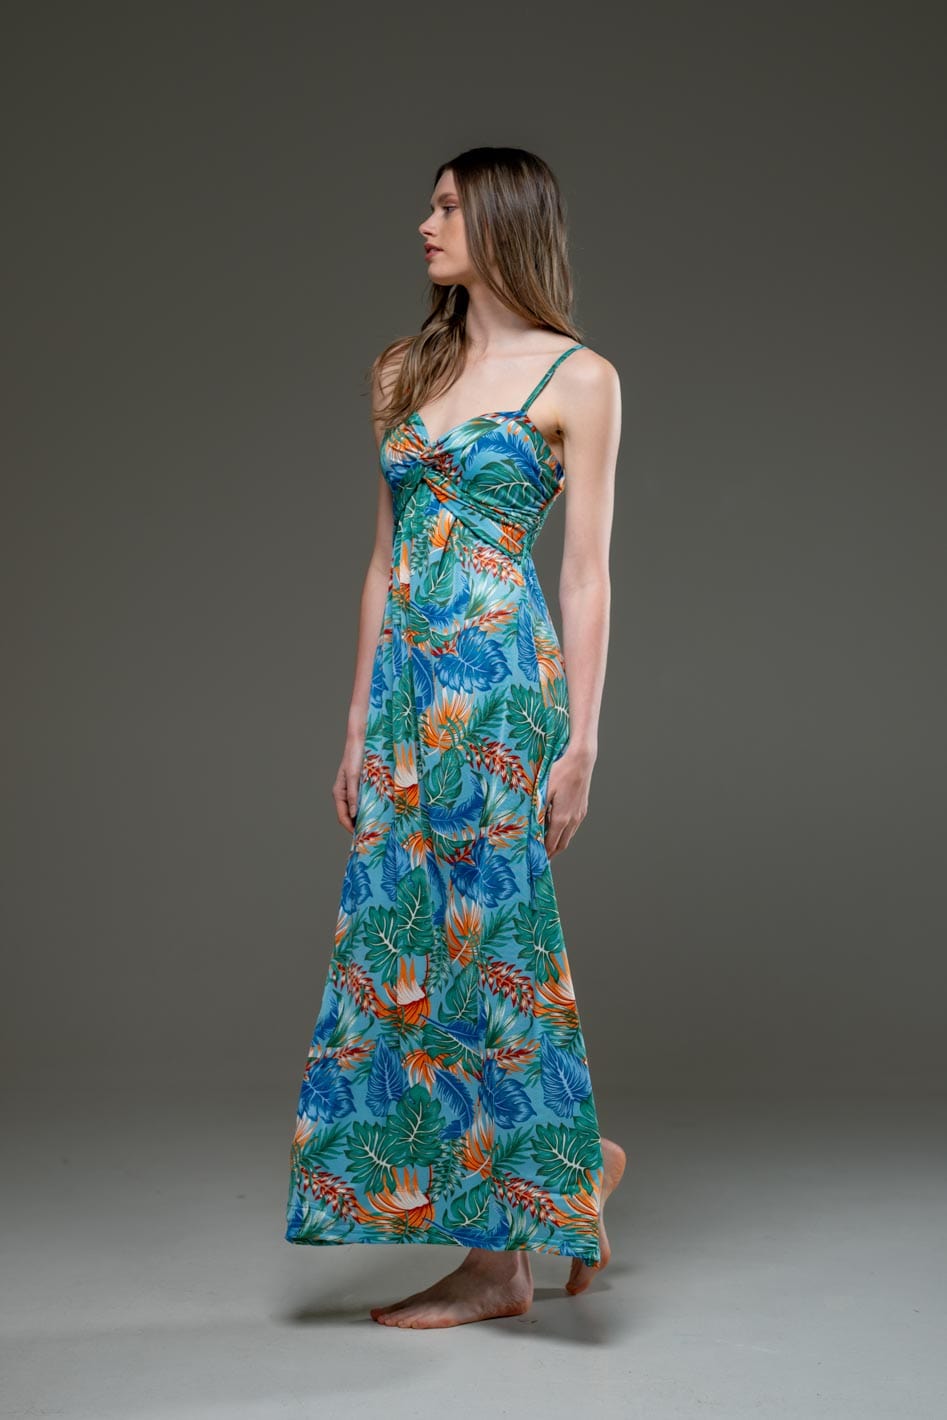 Casual Blue Floral Print Streched Jersey Spaghetti Strap Long Dress